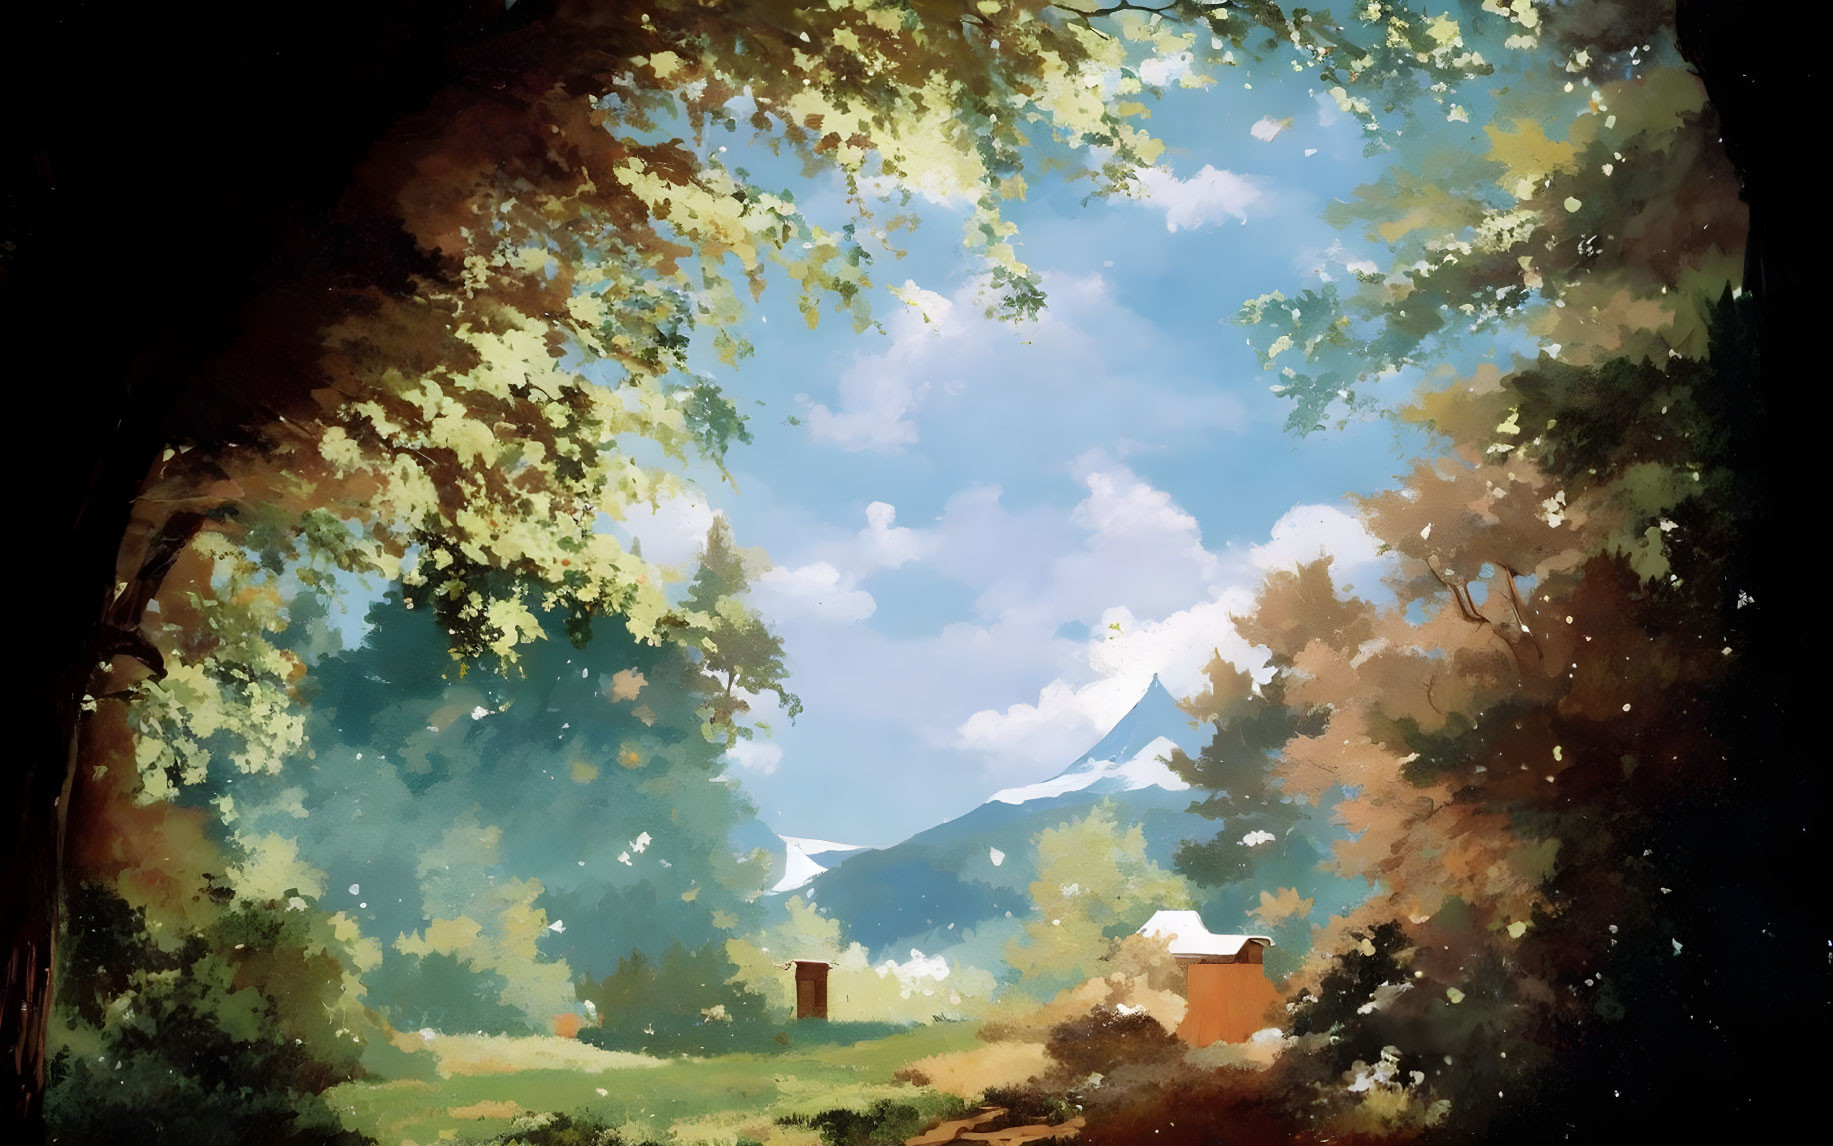 Vibrant painterly landscape with sunlit clearing, trees, and distant mountains